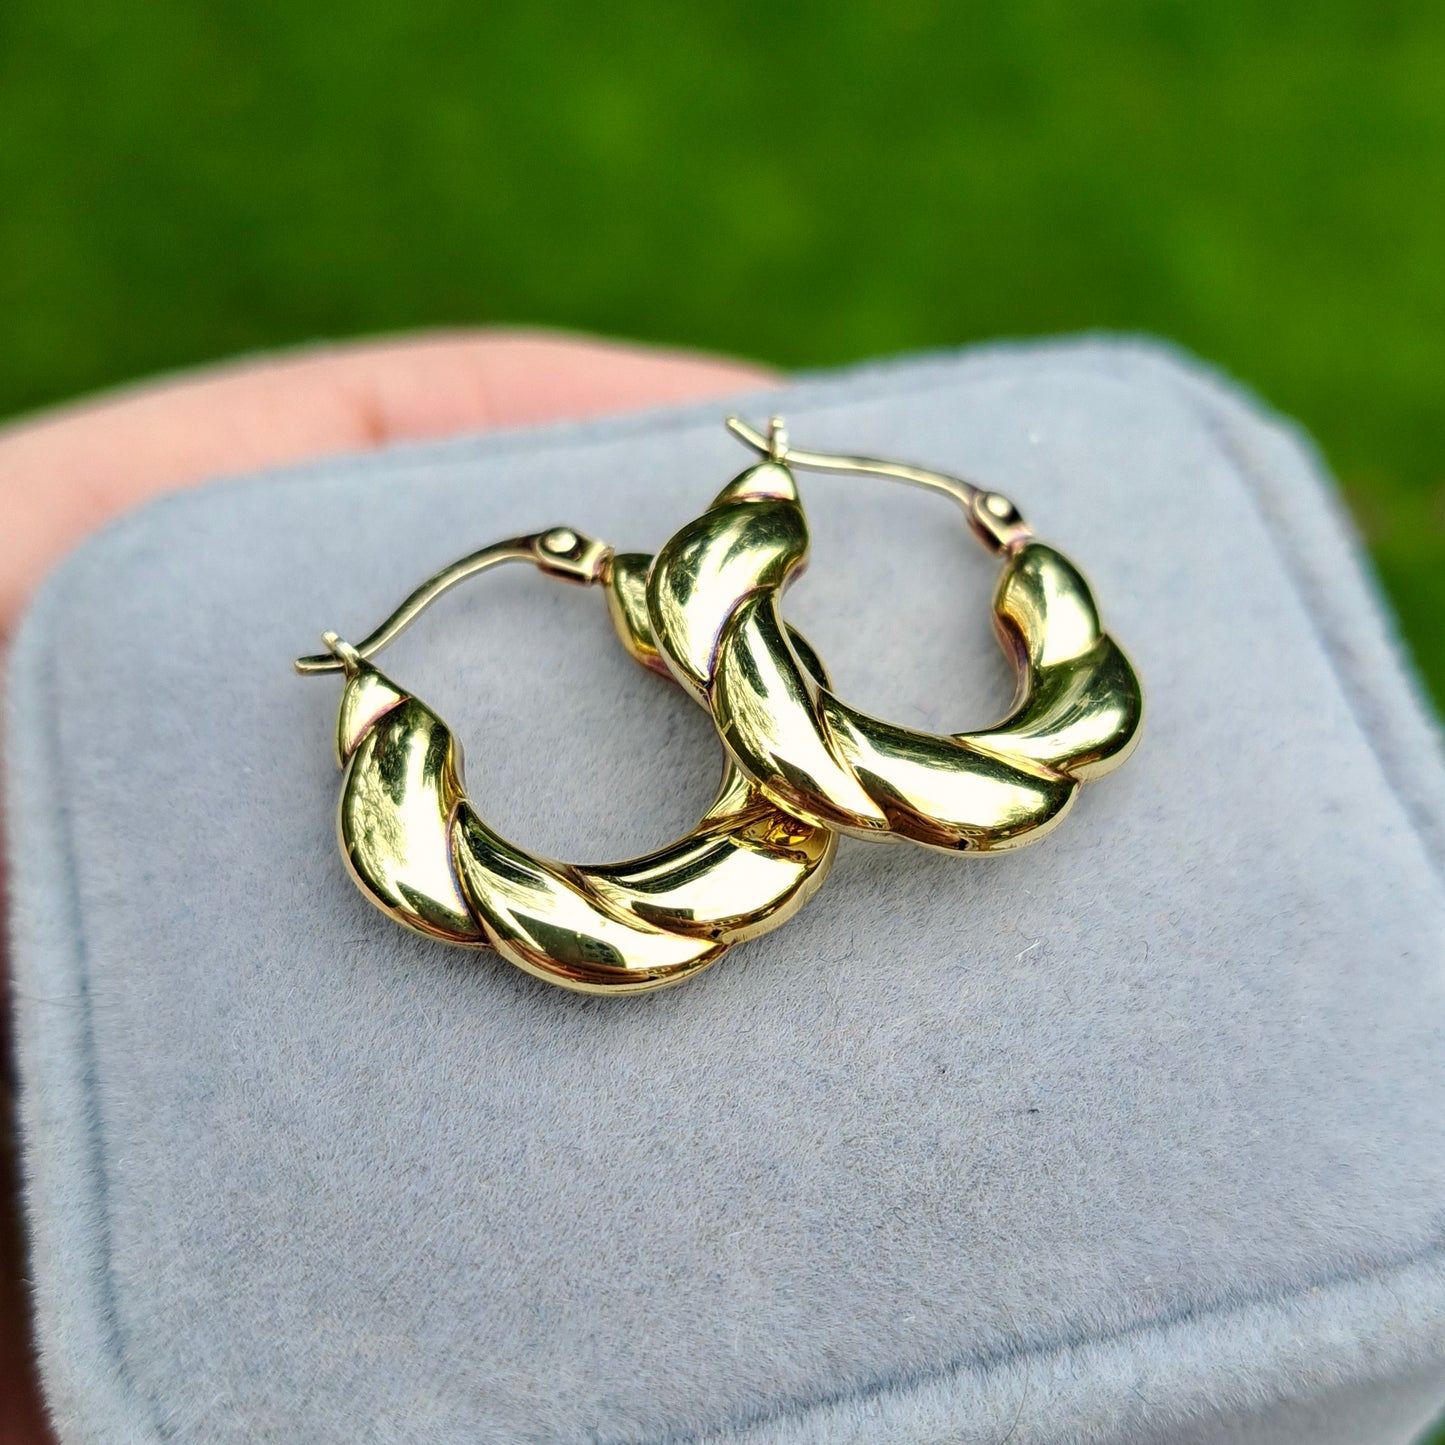 Pre-owned 9ct Gold Twisted Creole Hoop Earrings, Unoaerre